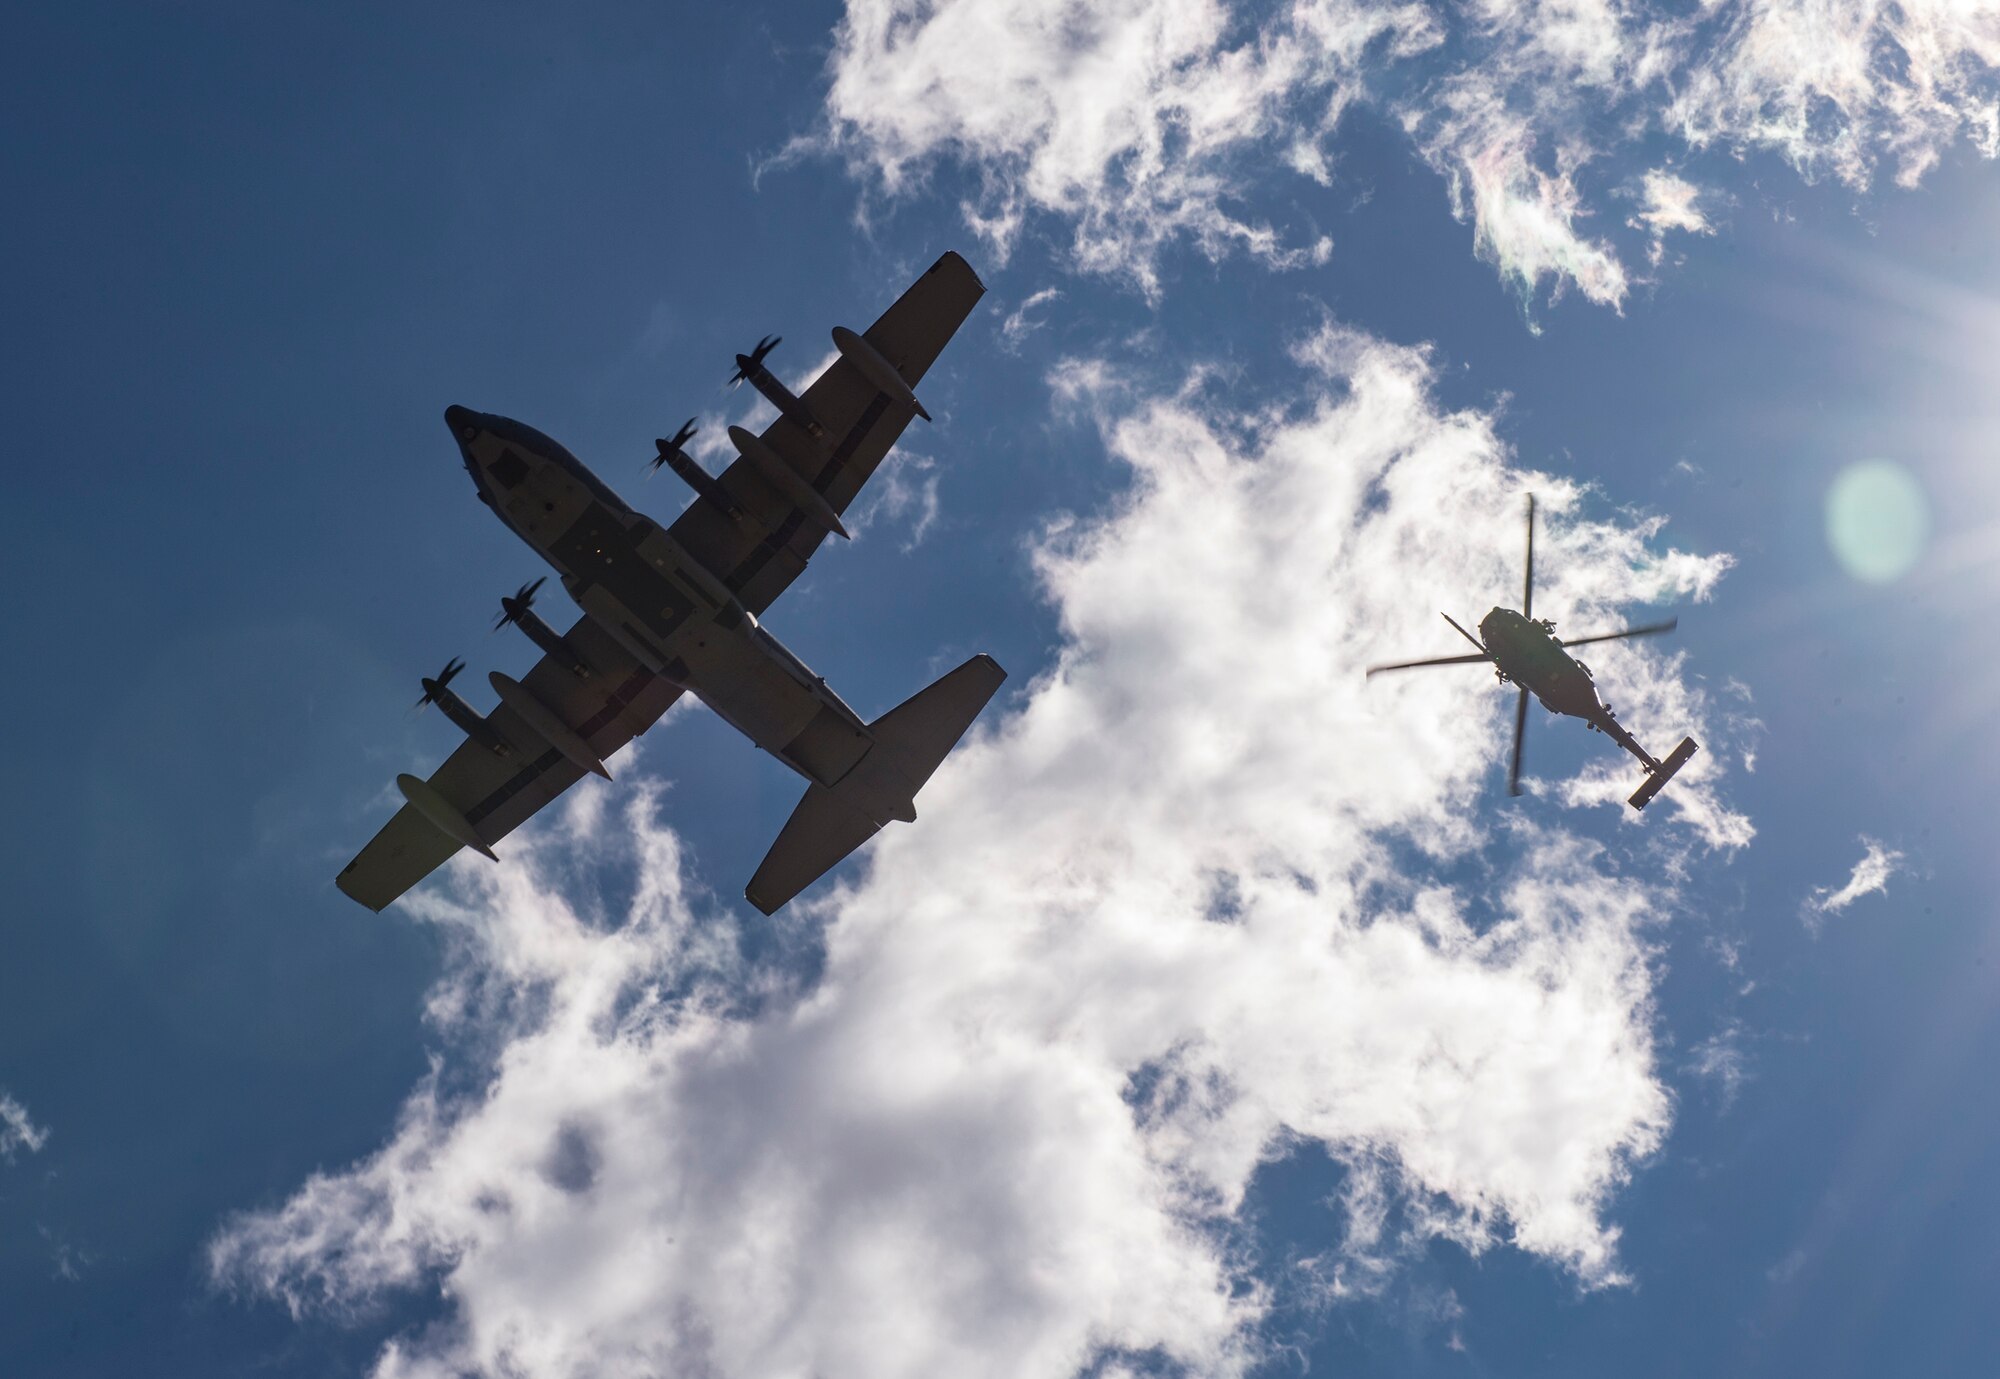 An HC-130J Combat King II and an HH-60G Pave Hawk fly over a formation of Airmen following a memorial service in honor of Capt. Mark Weber, March 21, 2018, at Moody Air Force Base, Ga. Weber, a 38th Rescue Squadron combat rescue officer and Texas native, was killed in an HH-60G Pave Hawk crash in Anbar Province, Iraq, March 15. During the ceremony, Weber was posthumously awarded a Meritorious Service Medal and the Air Force Commendation Medal. (U.S. Air Force photo by Andrea Jenkins)